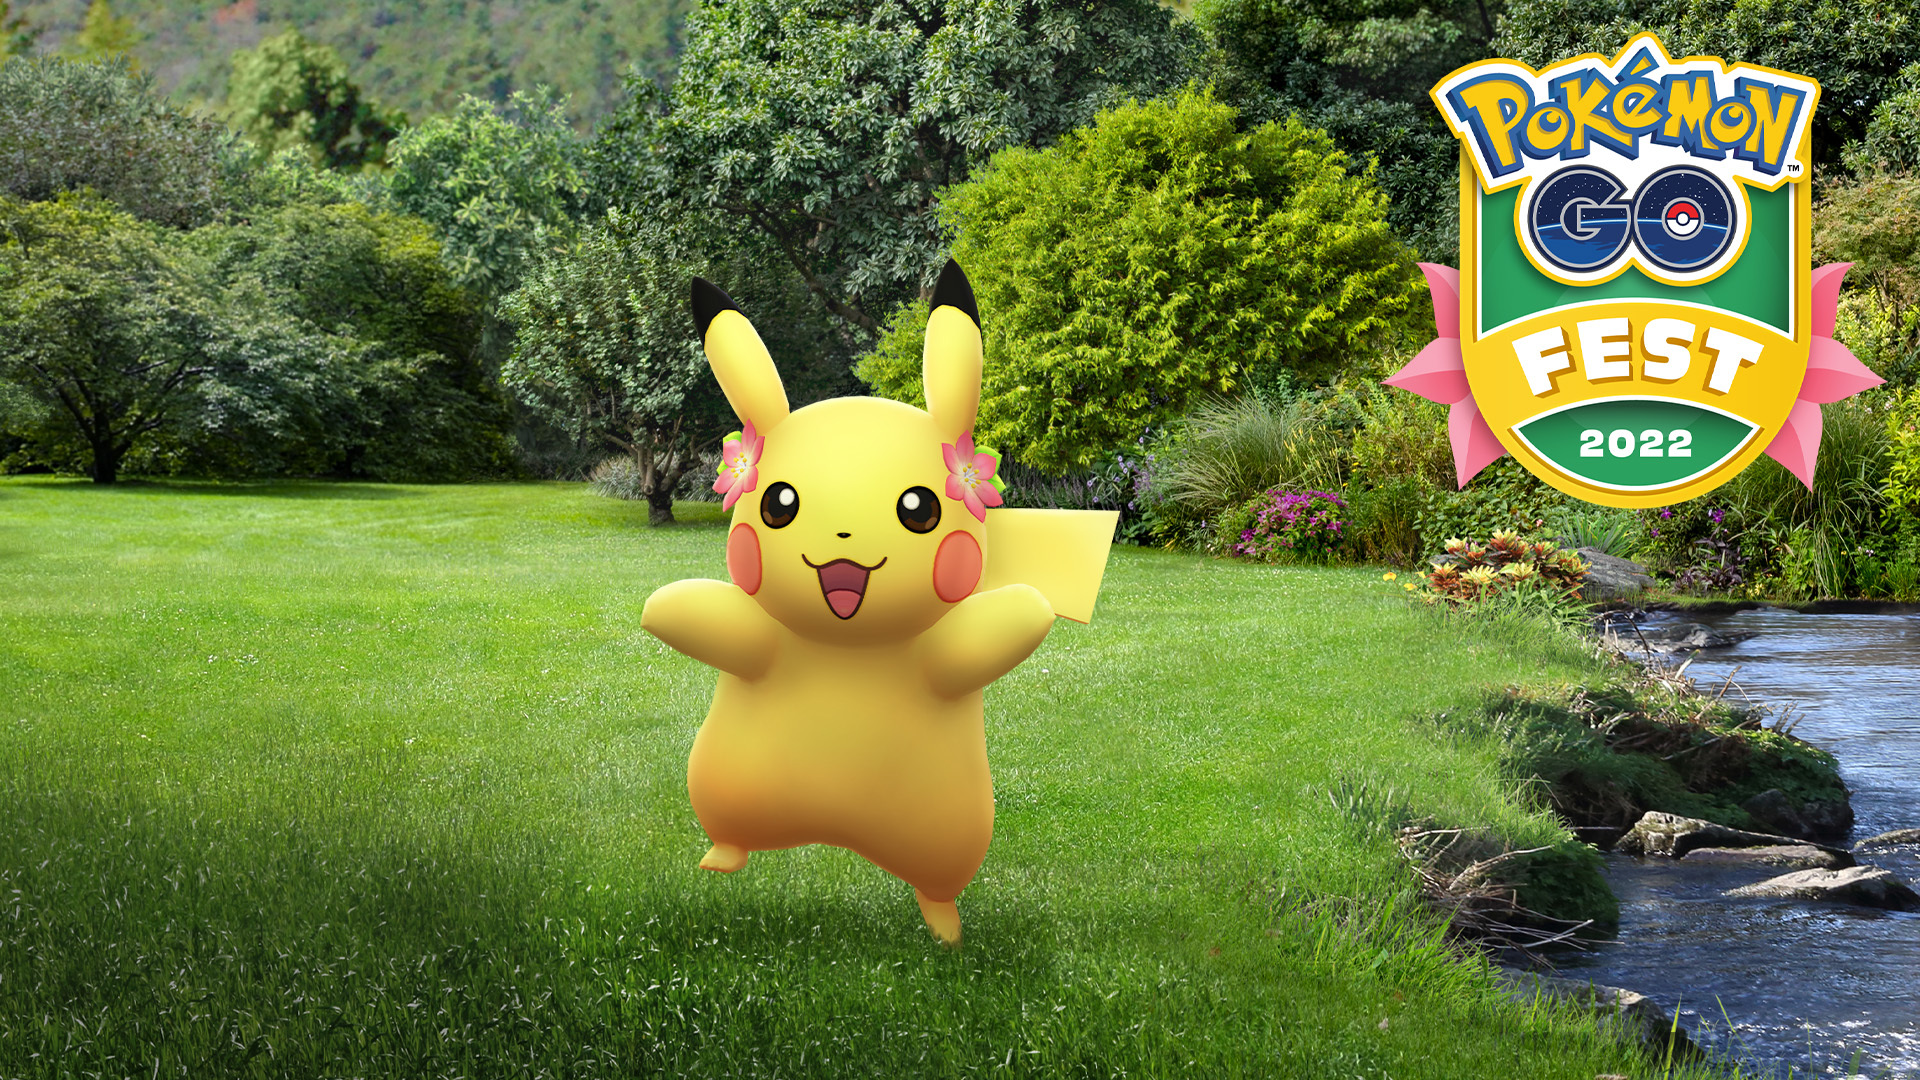 Pokémon GO - In celebration of #PokemonGOFest2022 and Shaymin's debut in Pokémon  GO, a Pikachu wearing a special Shaymin-inspired Gracidea flower costume is  appearing! 🌺 You can encounter it in the wild